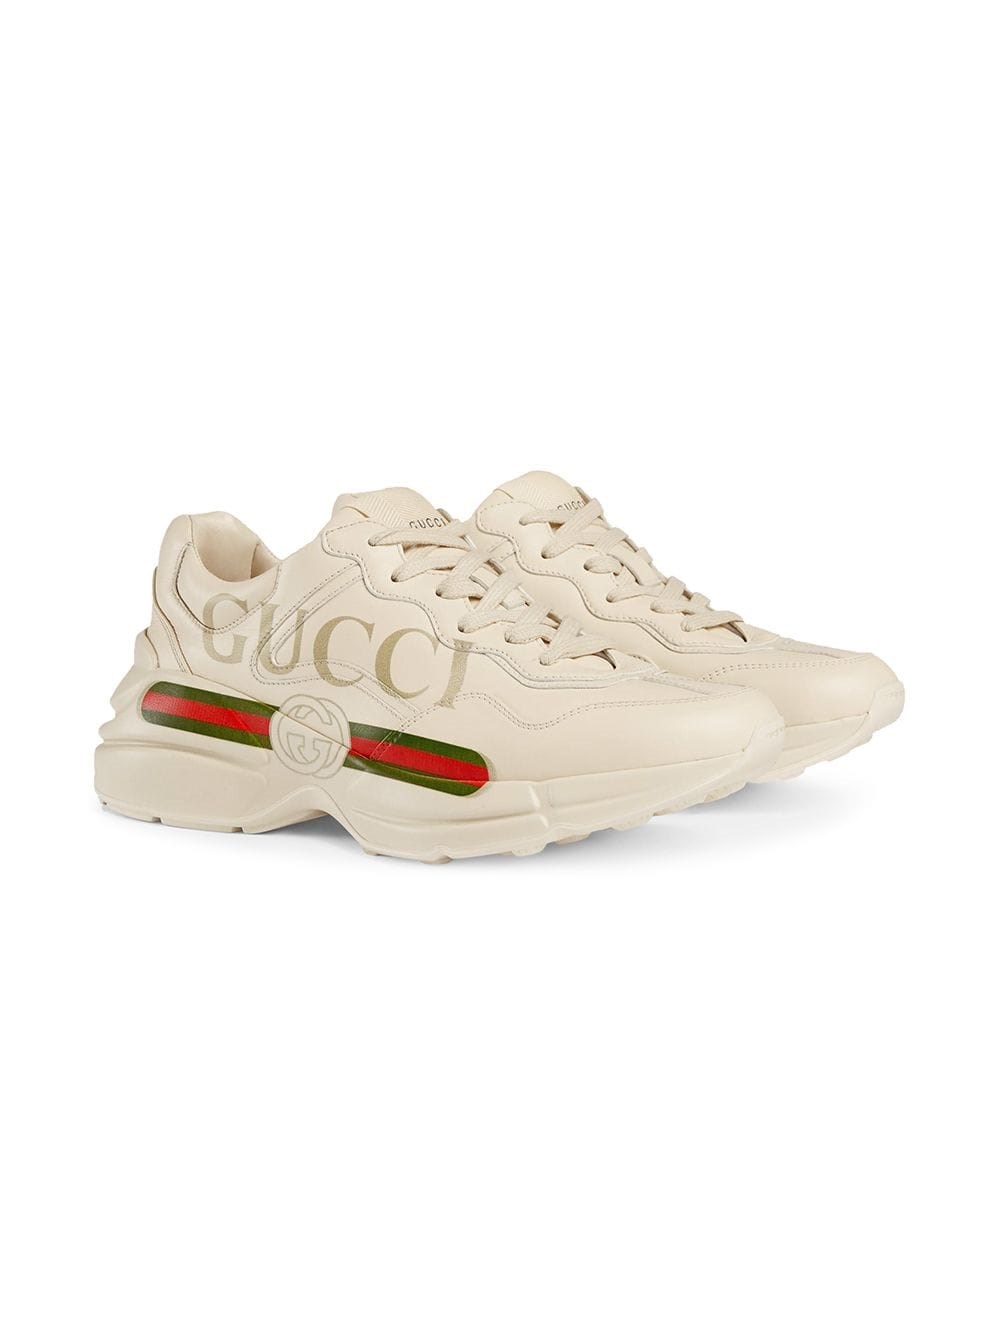 gucci SNEAKERS LOGO available on 